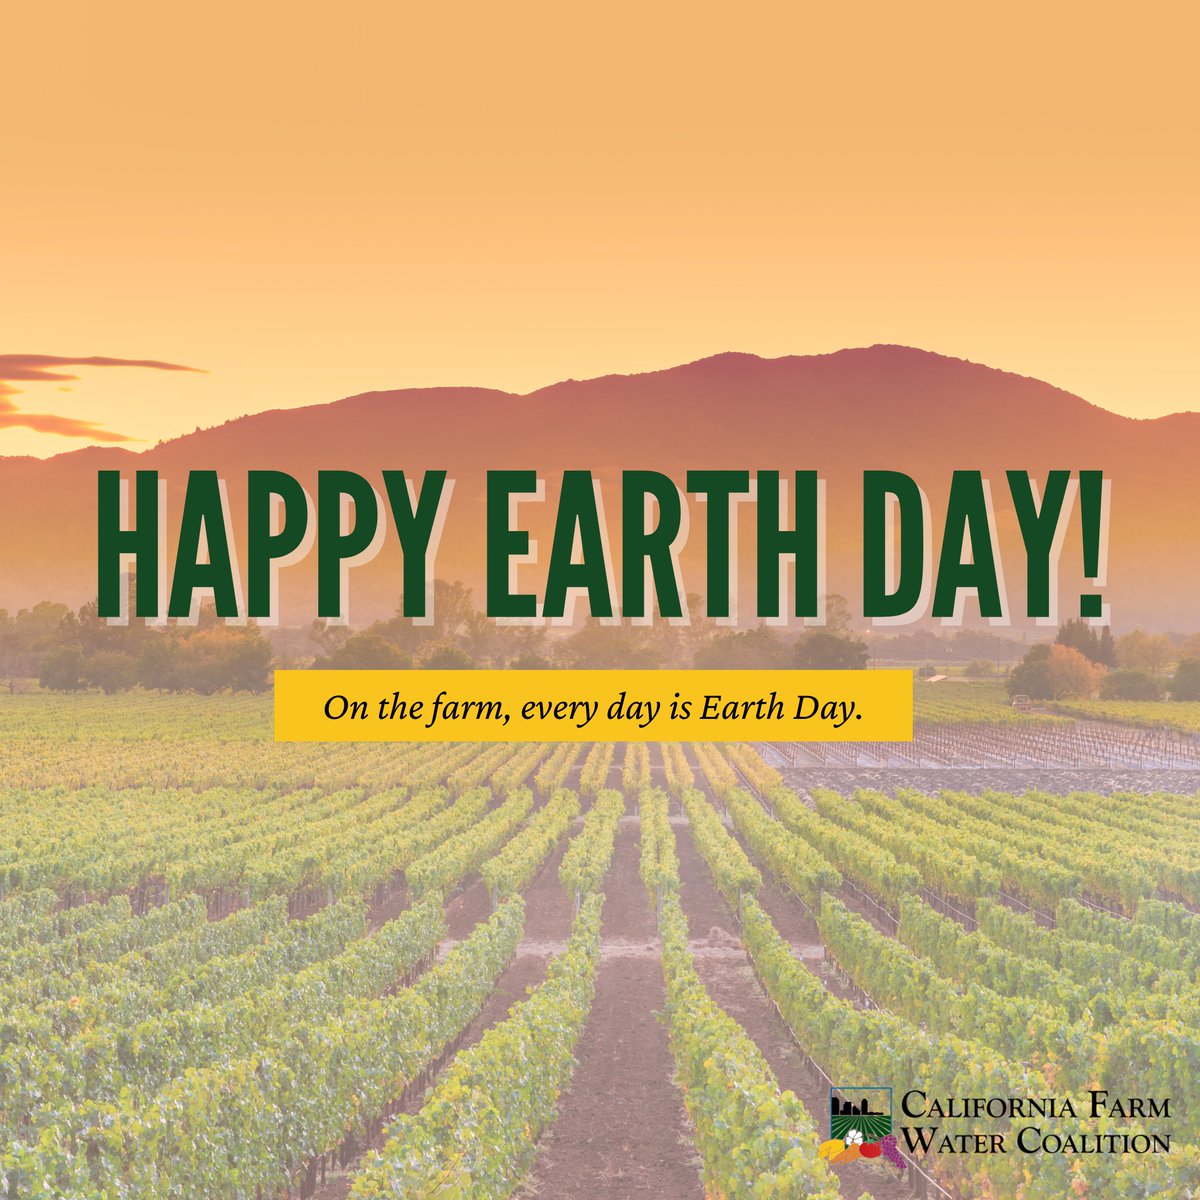 Earth Day reminds us of the vital connection between agriculture and our planet's health. Today and every day, let's celebrate the farmers and ranchers who work tirelessly to nourish us while caring for the earth. 🌎🌾 #EarthDay #Agriculture #CAWater